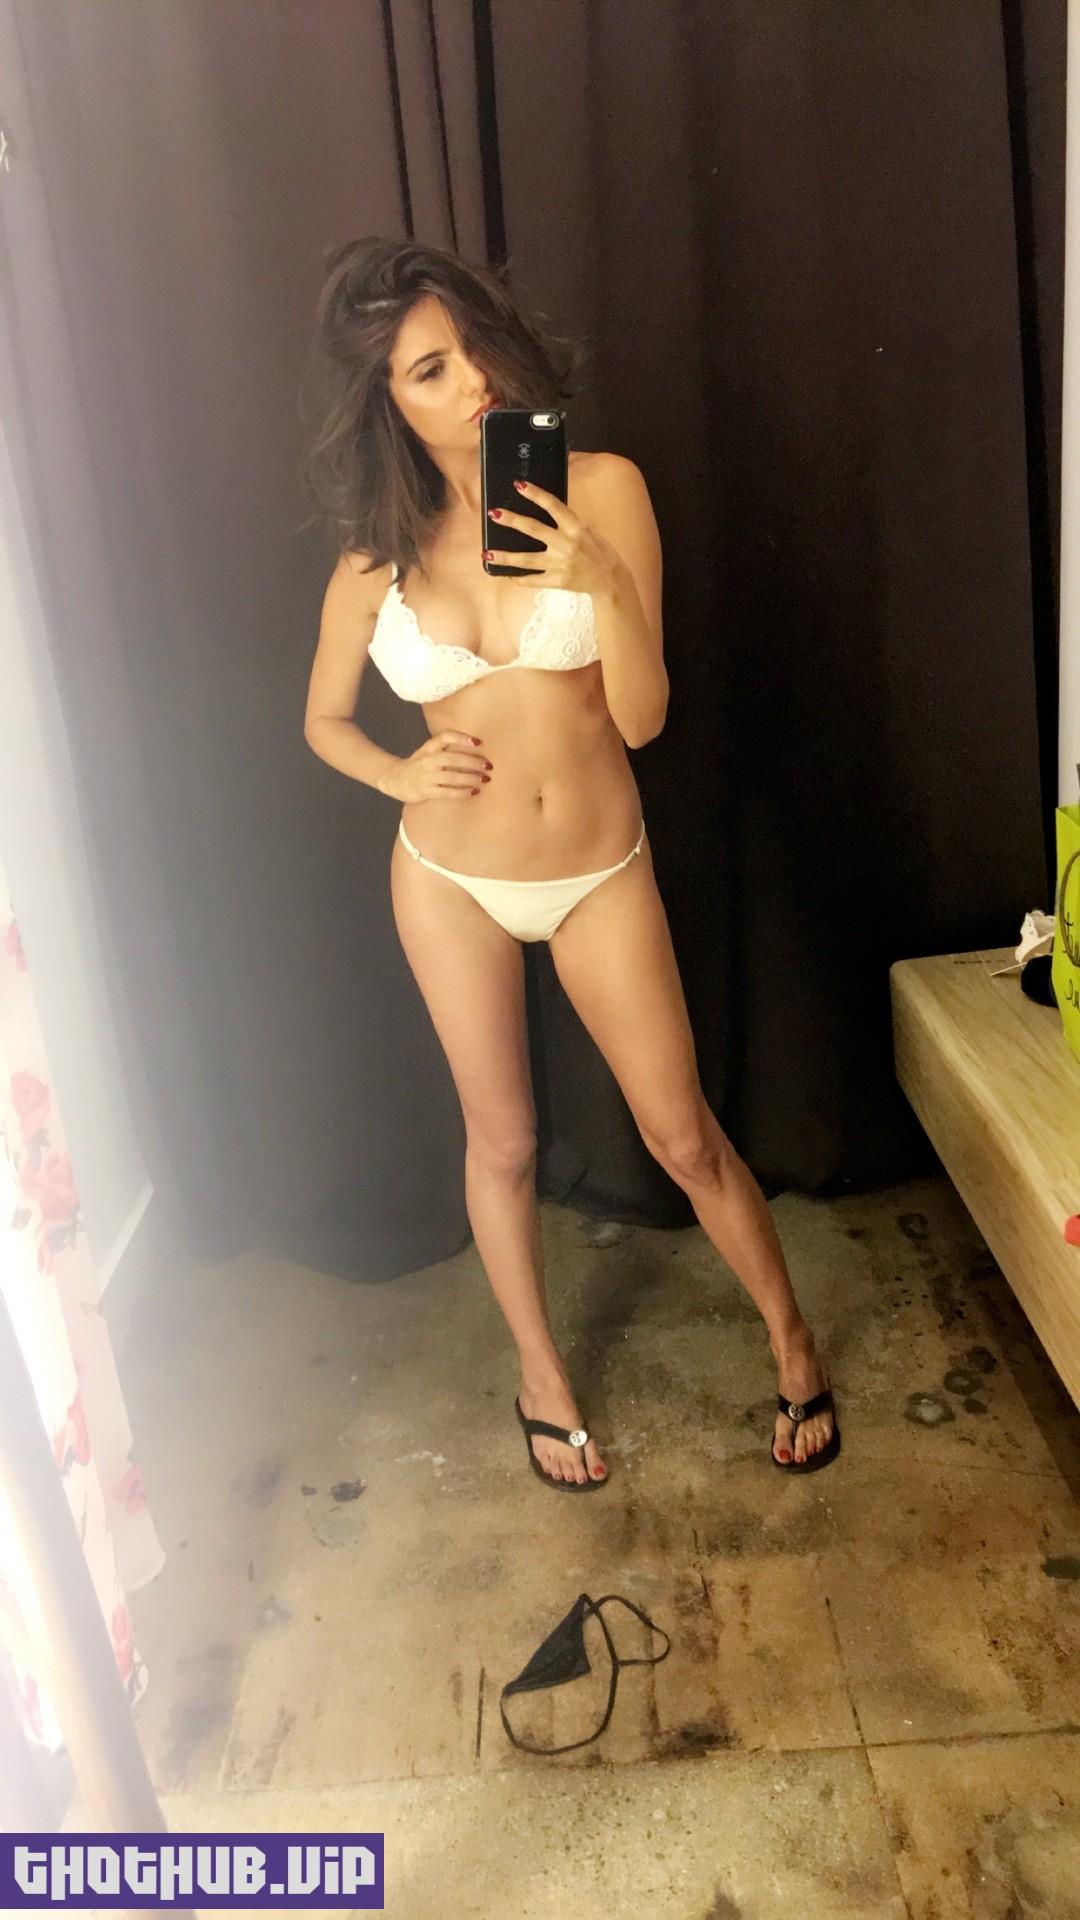 Guardians of the Galaxy actress Mikaela Hoover nude photos leaked from iCloud The Fappening 2018